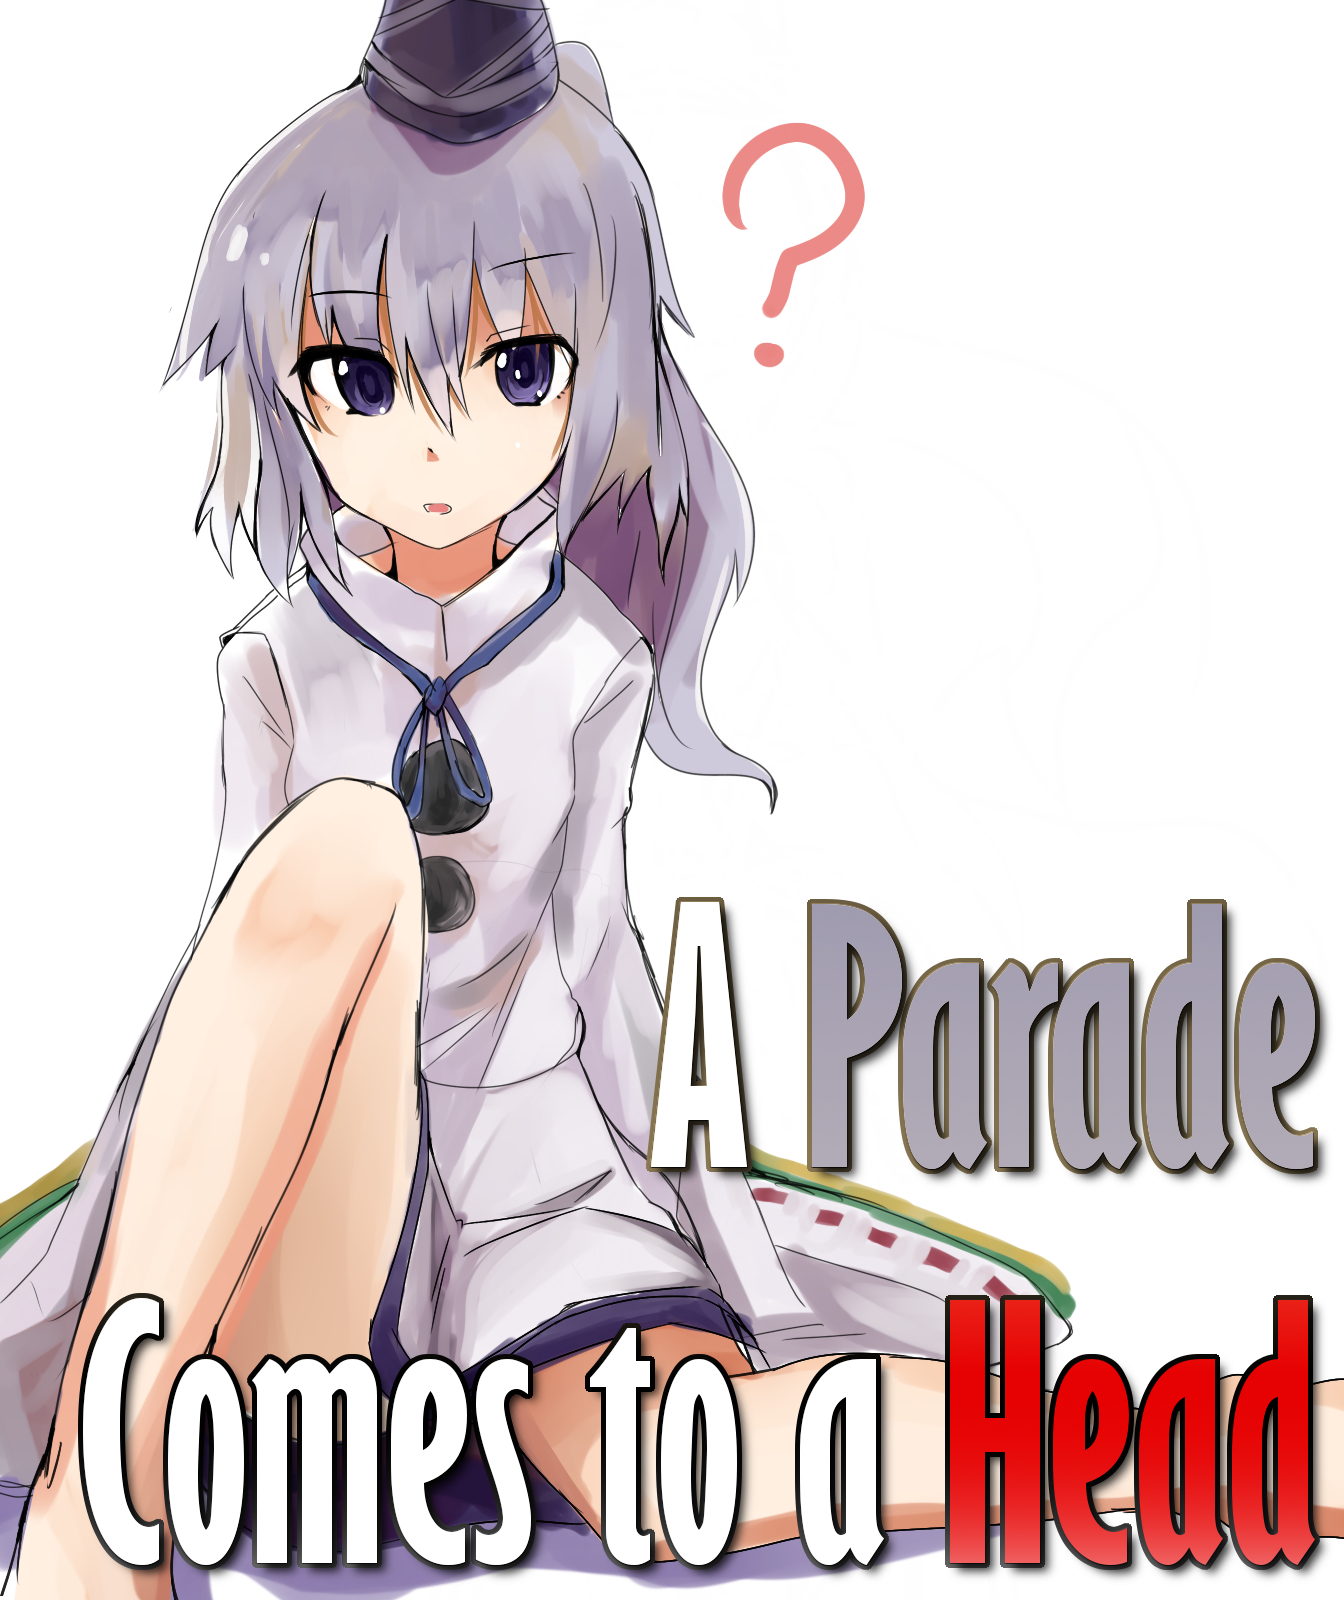 Touhou Archive - Okay, the meme has officially peaked We